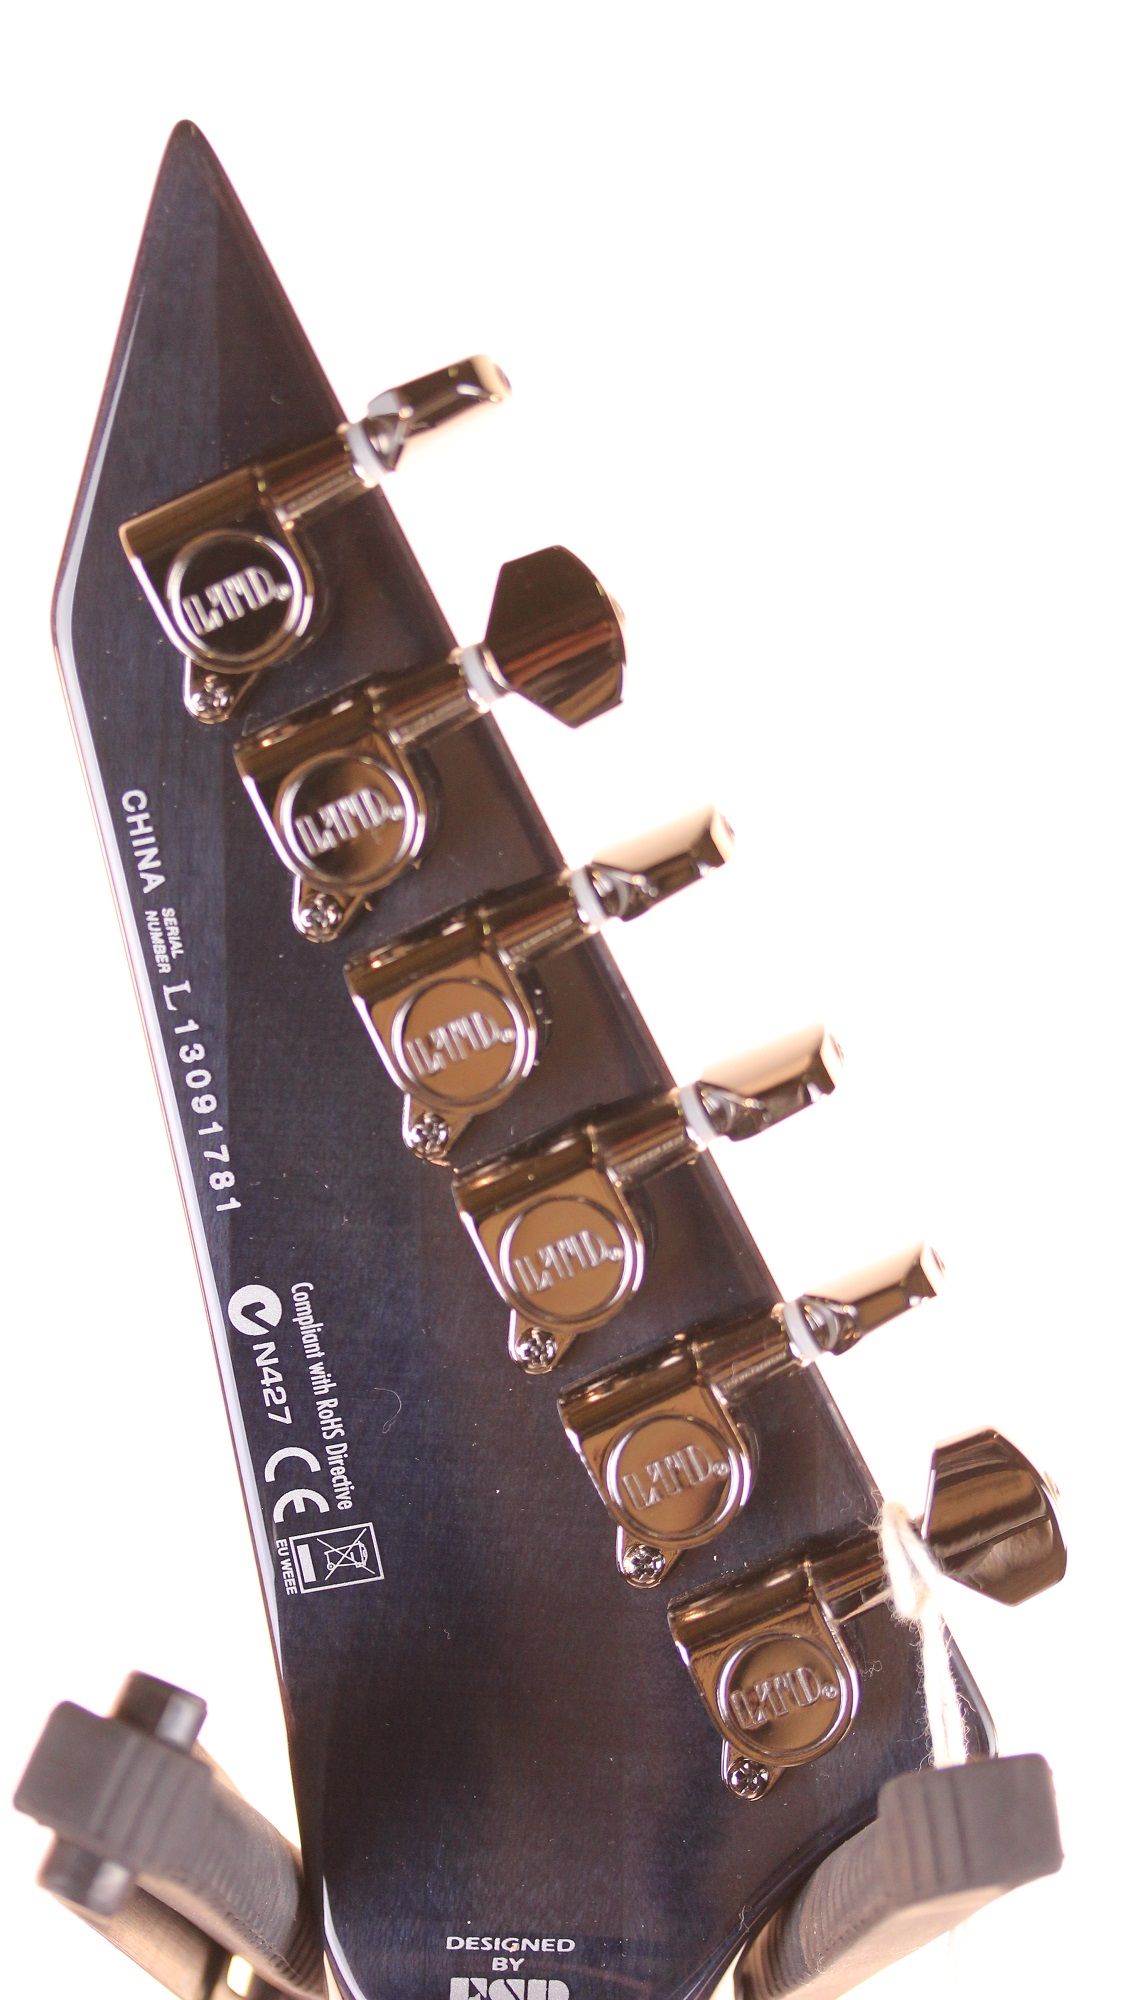 esp guitar serial numbers starting with l